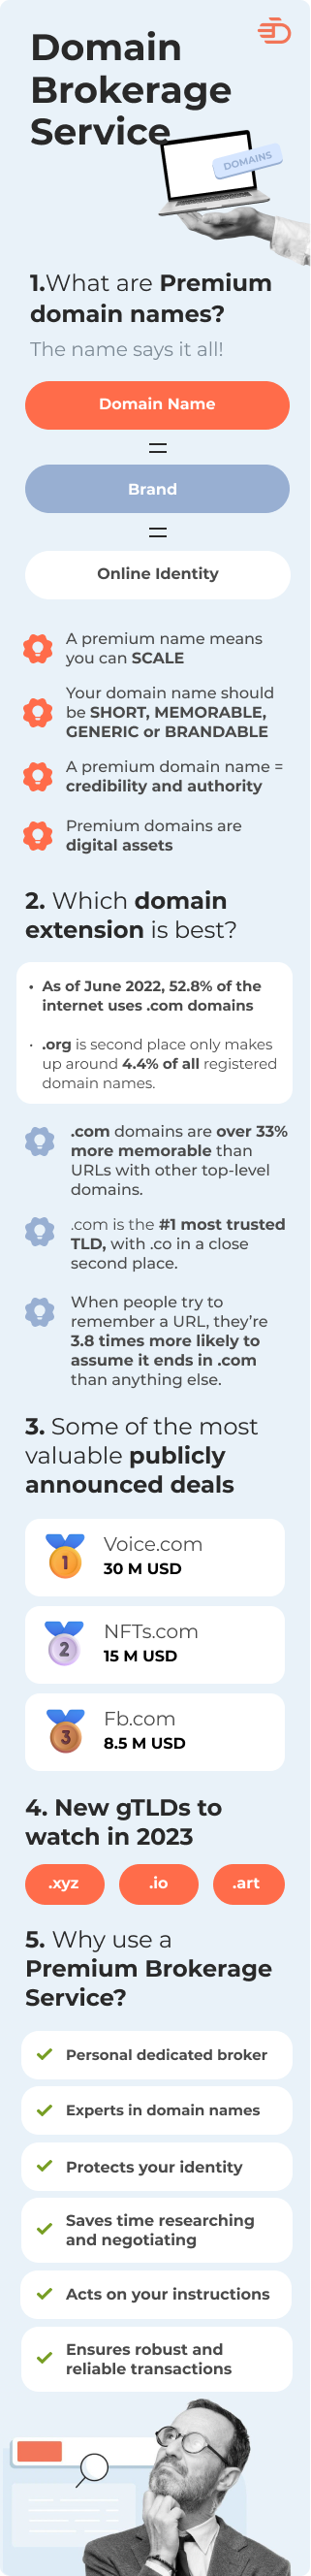 Best Domain Name Brokerage Service Infographic